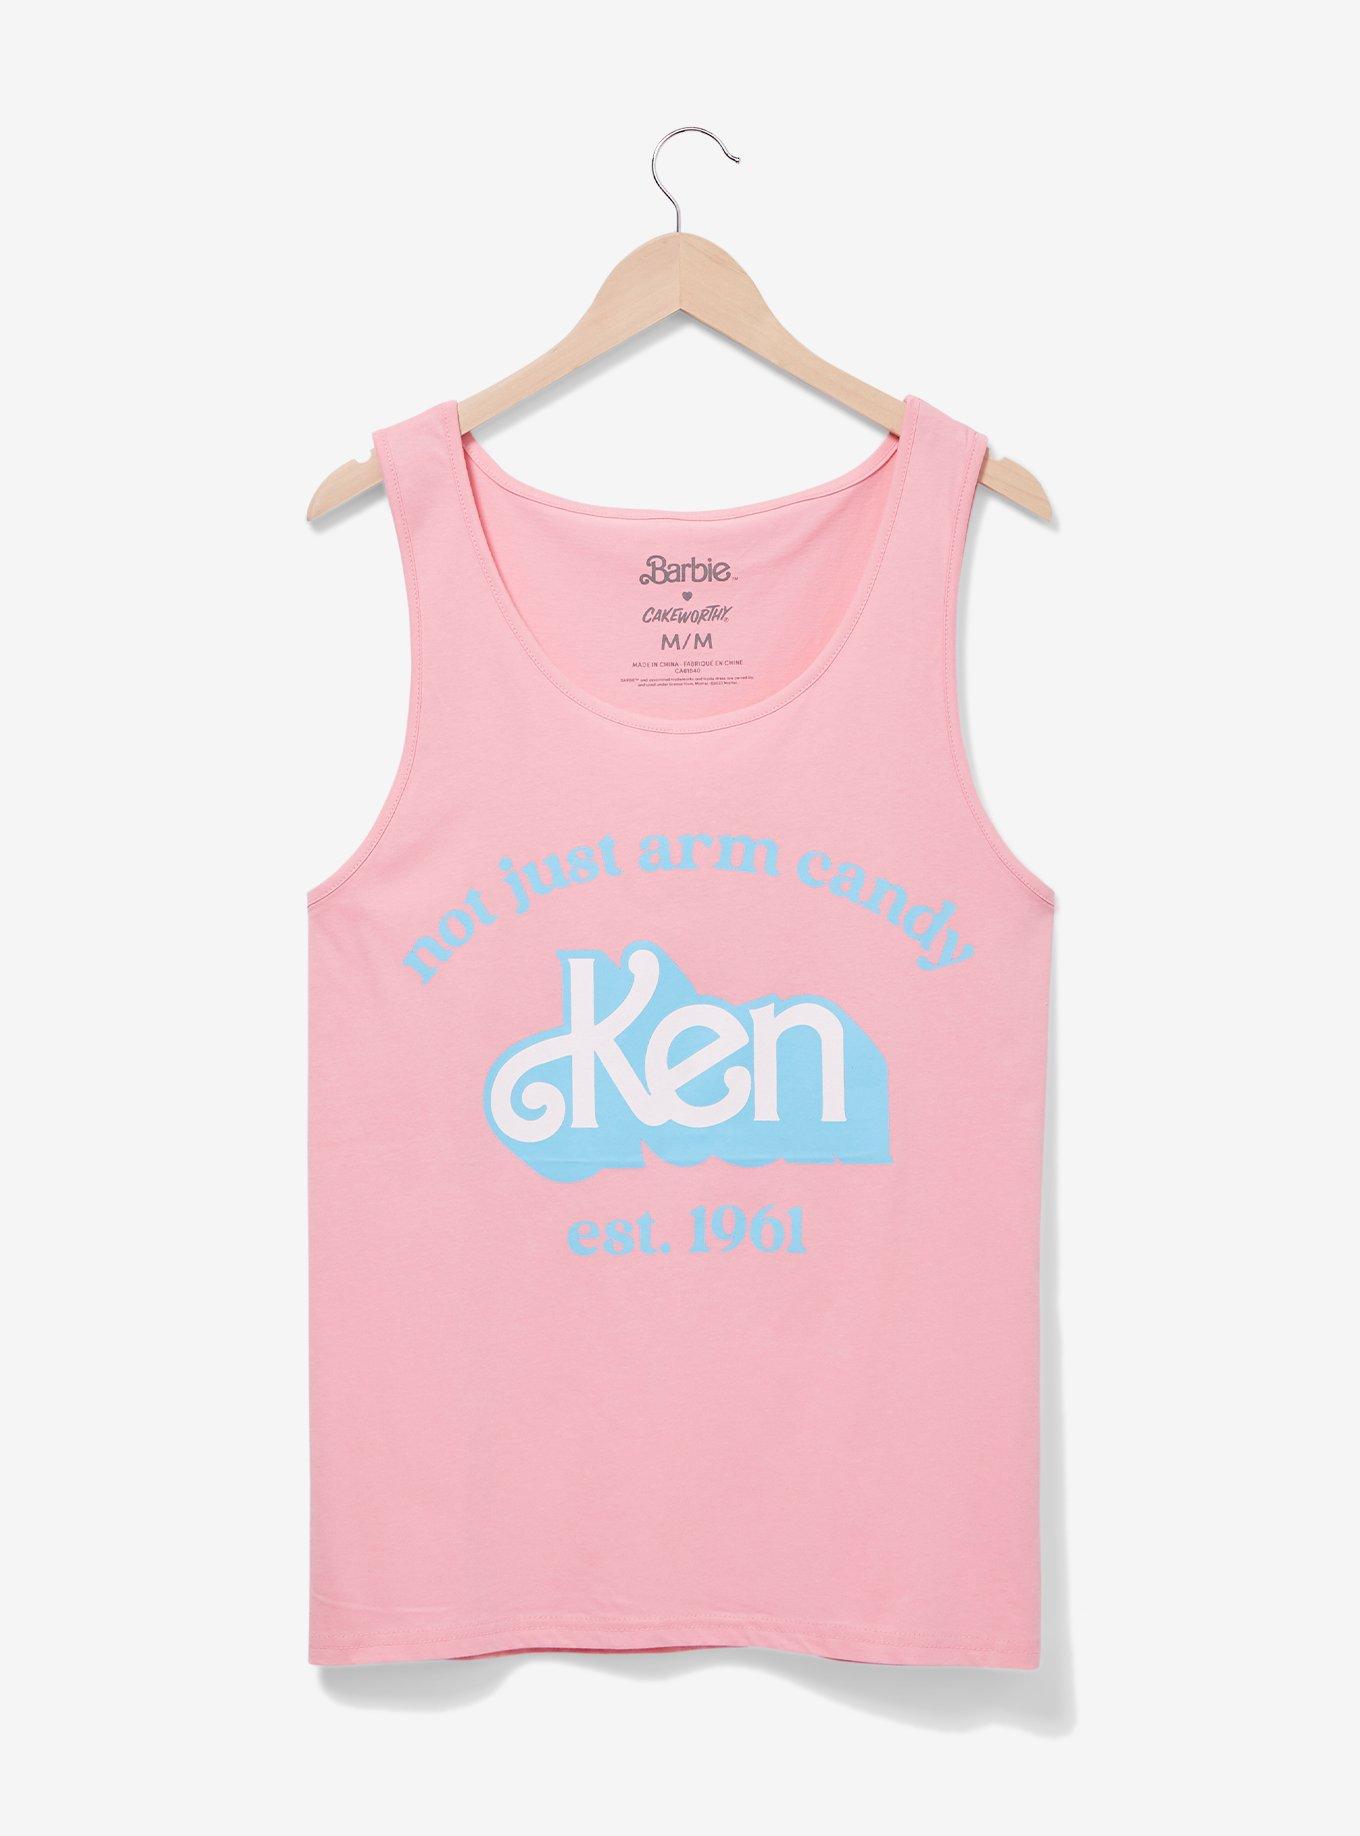 Barbie Ken Not Just Arm Candy Tank Top - BoxLunch Exclusive | BoxLunch